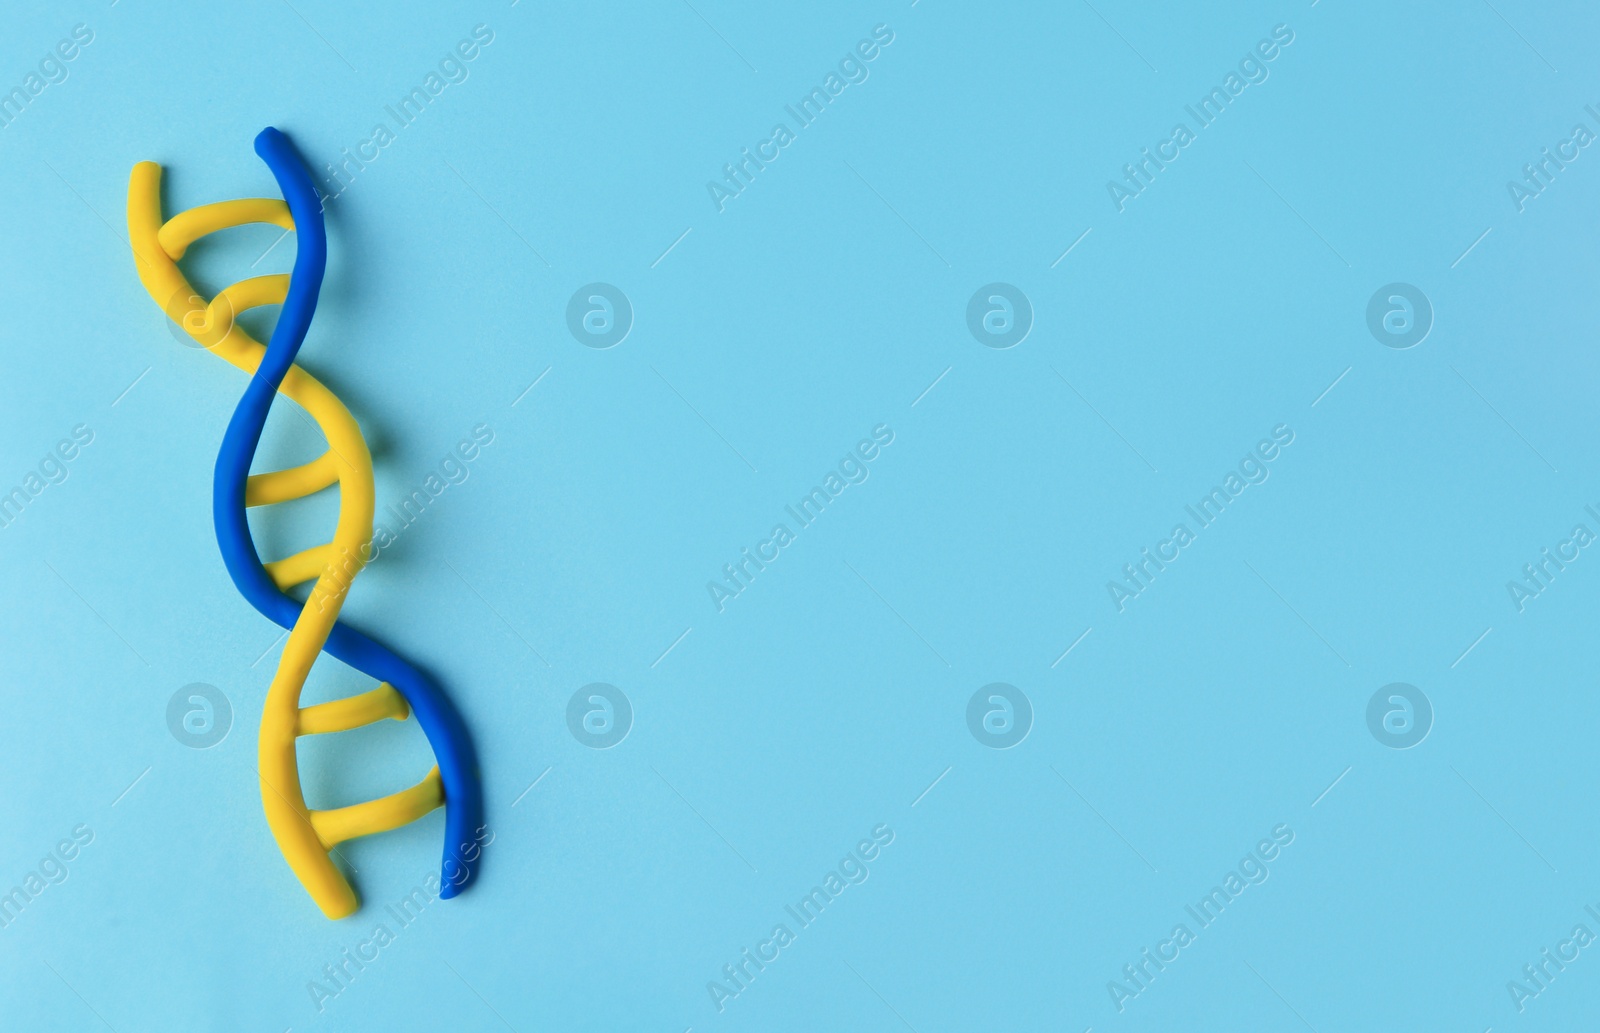 Photo of DNA molecule model made of colorful plasticine on light blue background, top view. Space for text